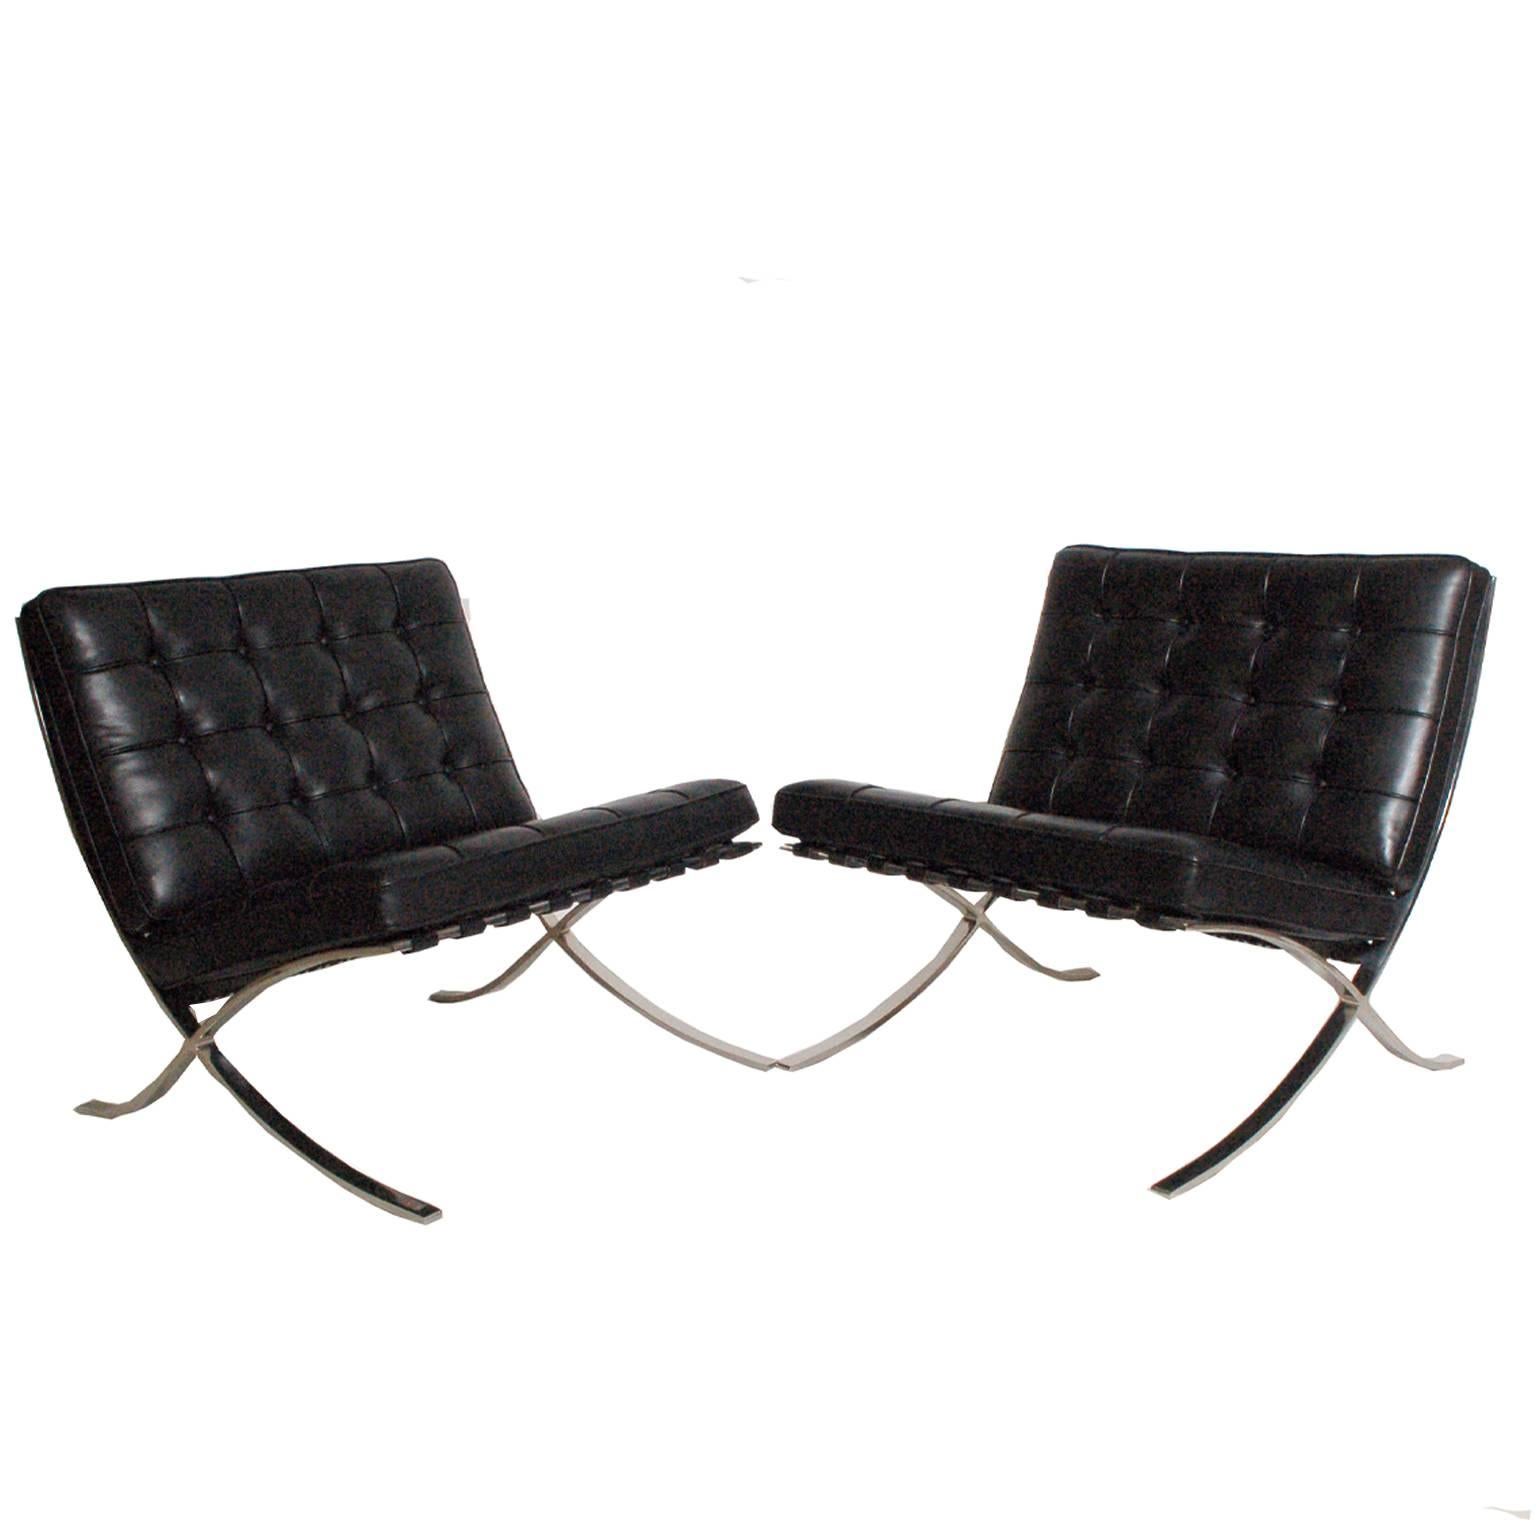 Modern Pair of Barcelona Chairs & Coffee Table by Mies van der Rohe for Knoll